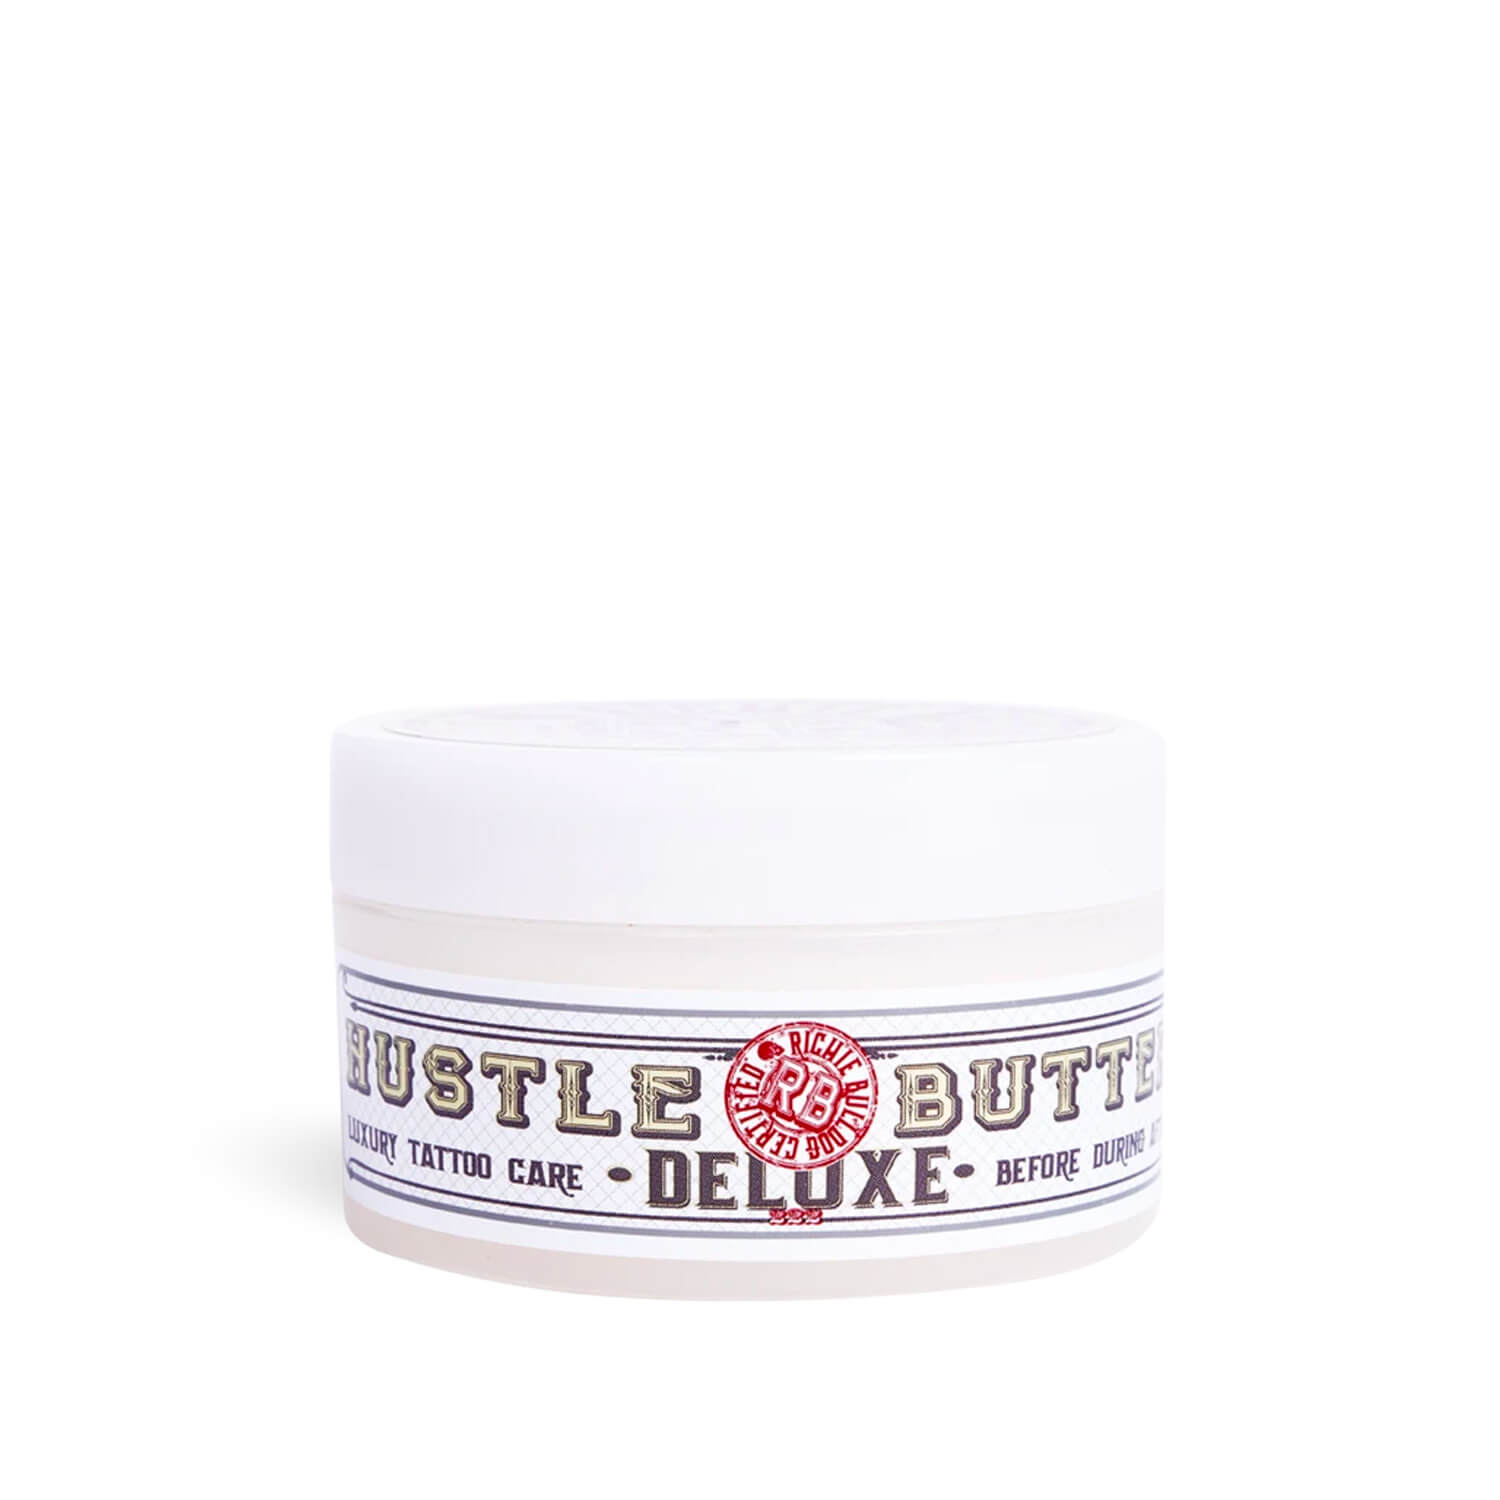 Hustle Butter Deluxe Vegan Tattoo Aftercare 150ml/5oz - Tattcare Limited